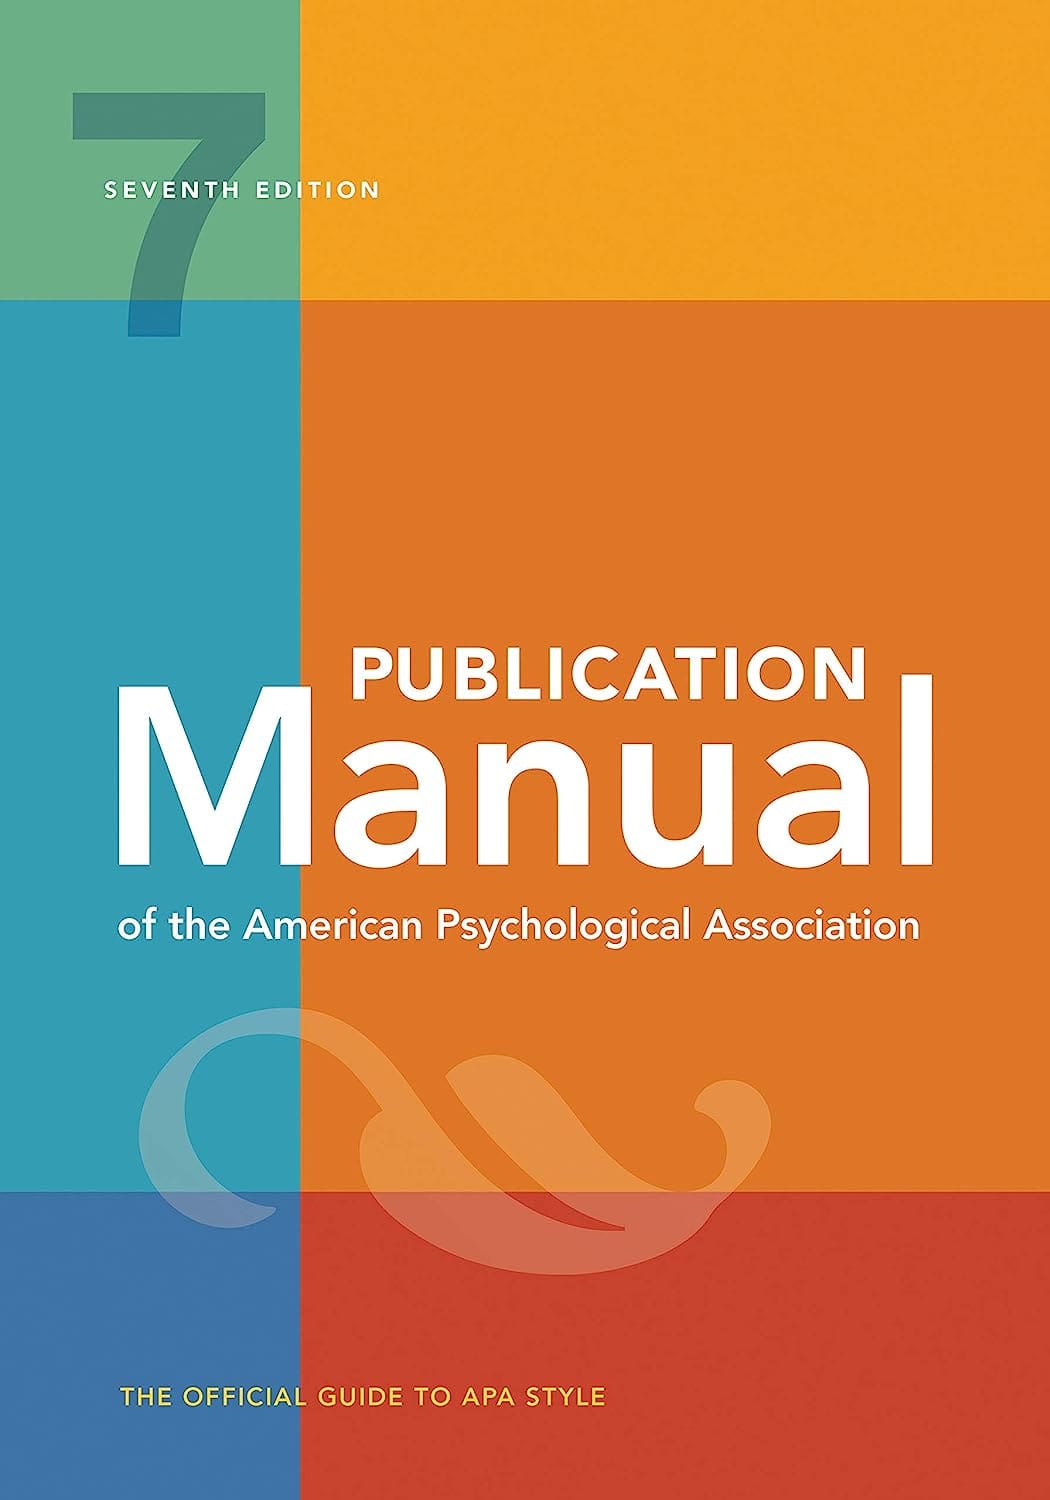 Publication Manual 7th Edition 2023 of the American Psychological Association